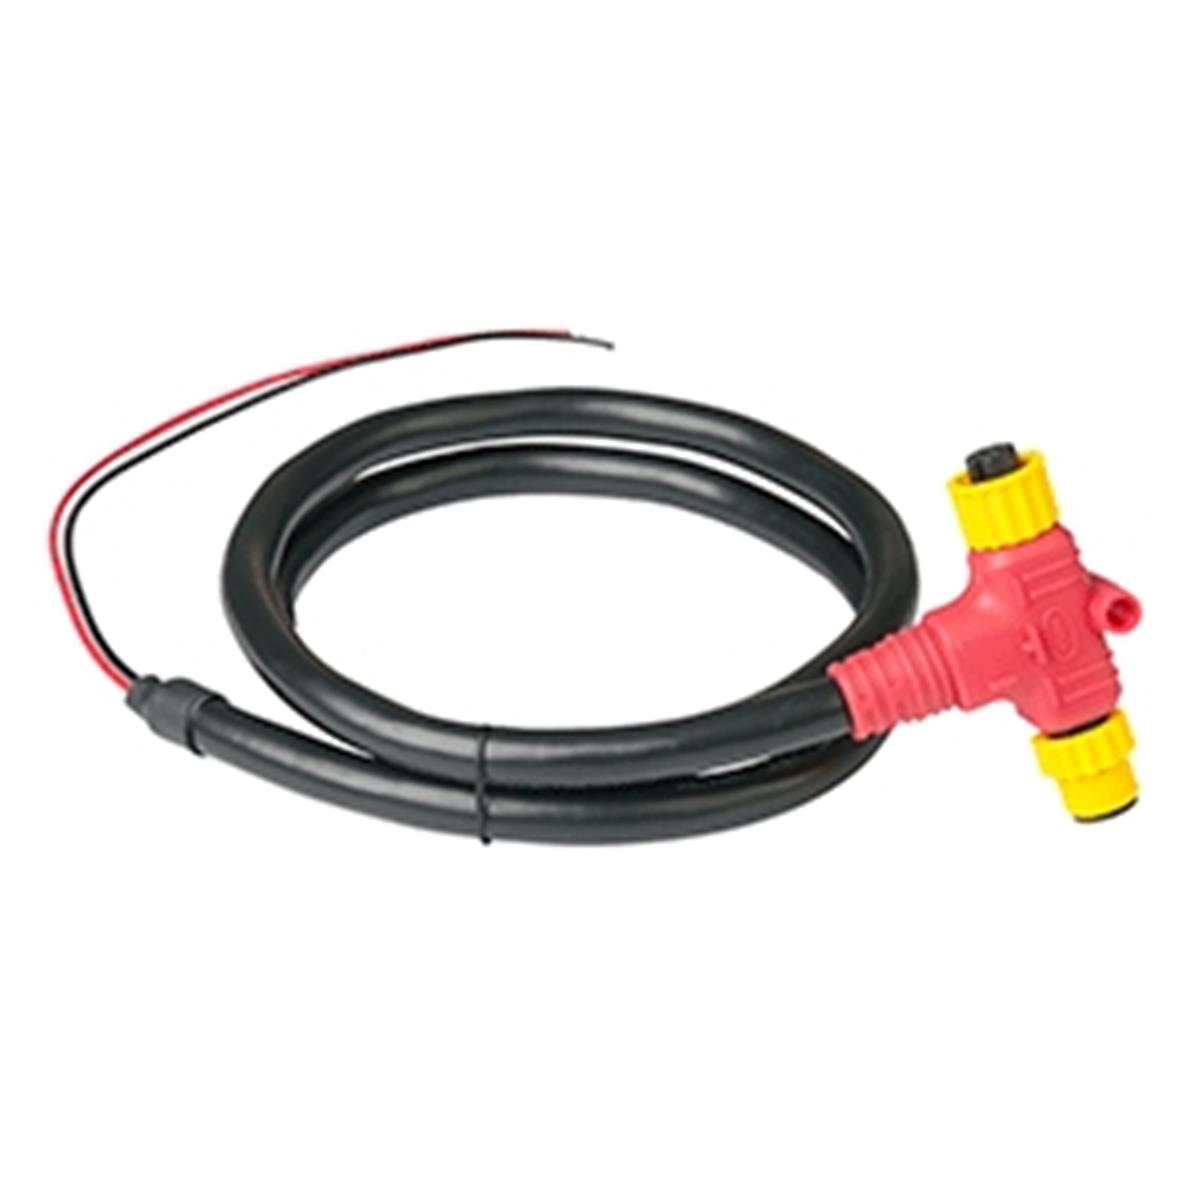 Picture of Ancor 270000 NMEA 2000 Power Cable with Tee - 1M